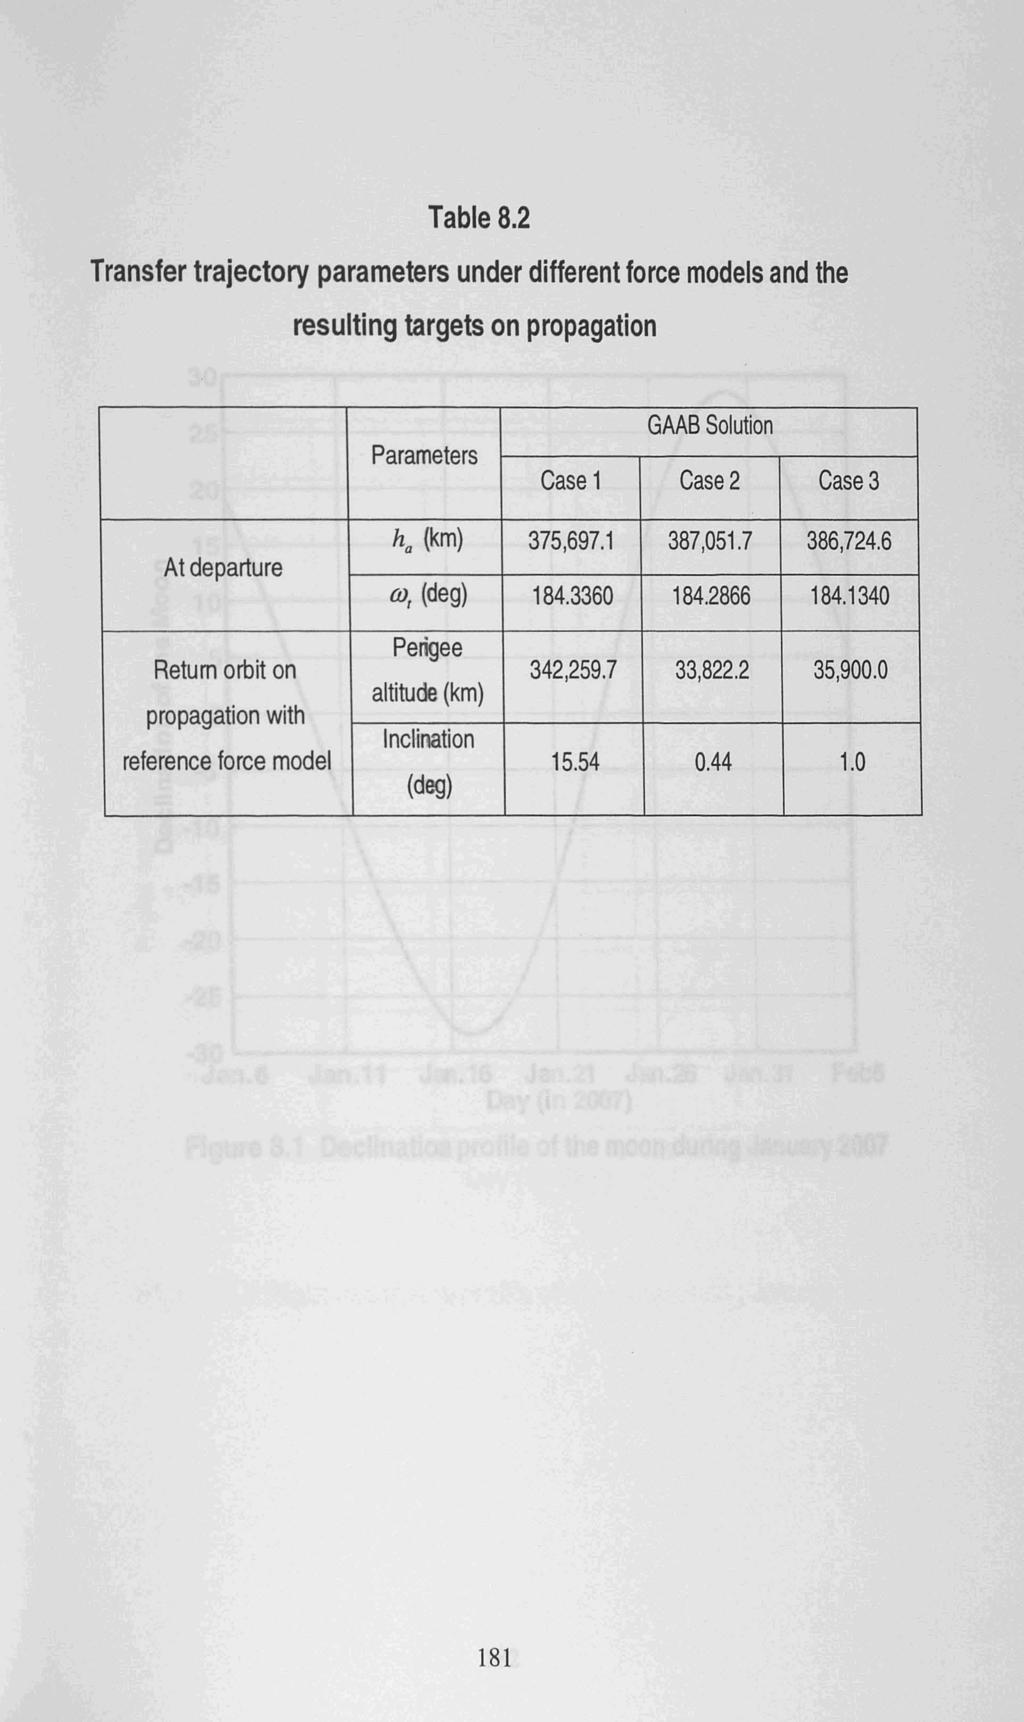 Table 8.2 Transfer trajectory parameters under different force models and the resulting targets on propagation Parameters GAAB Solution Case 1 Case 2 Case 3 At departure h a (km) 375,697.